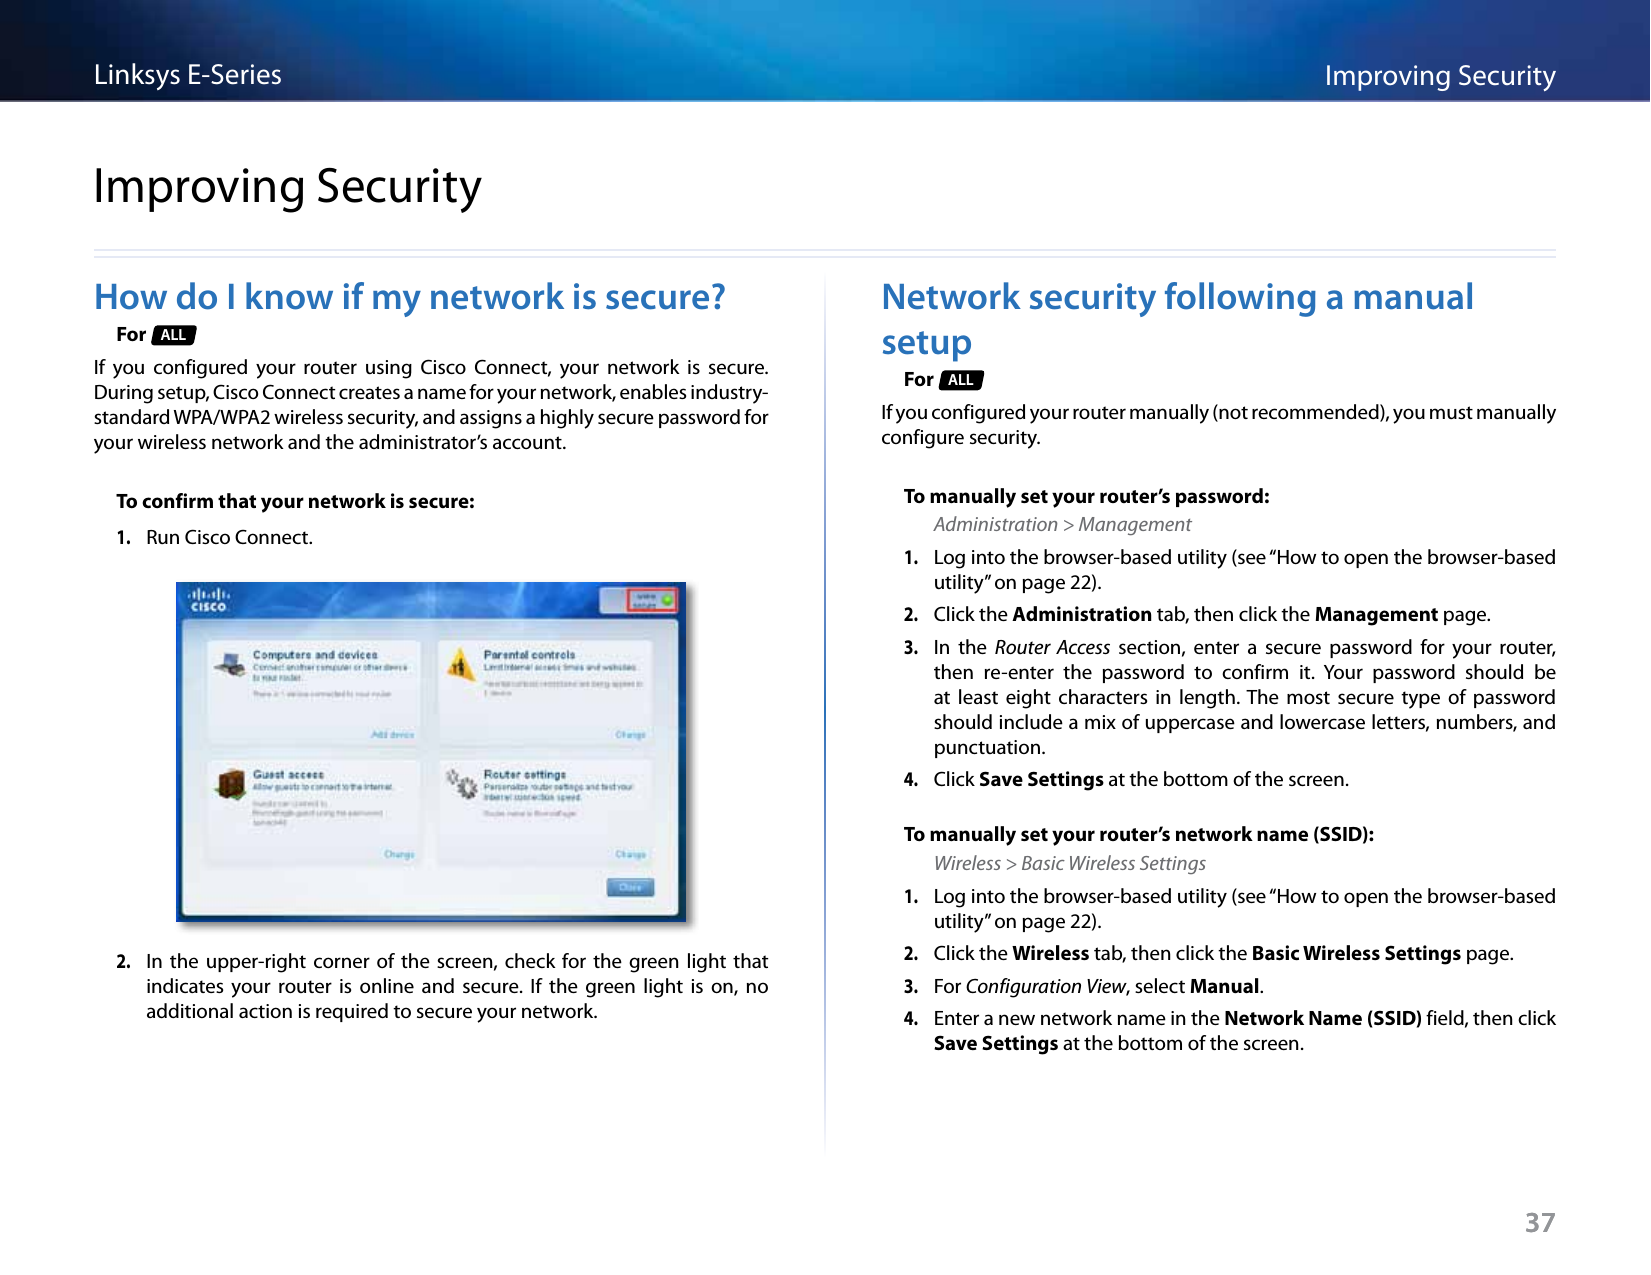 37Improving SecurityLinksys E-Series37How do I know if my network is secure?For  ALLIf  you  configured  your  router  using  Cisco  Connect,  your  network  is  secure. During setup, Cisco Connect creates a name for your network, enables industry-standard WPA/WPA2 wireless security, and assigns a highly secure password for your wireless network and the administrator’s account.To confirm that your network is secure:1. Run Cisco Connect.2. In  the upper-right  corner of  the  screen,  check  for  the green  light that indicates  your  router  is  online  and  secure.  If  the  green  light  is  on,  no additional action is required to secure your network.Network security following a manual setupFor  ALLIf you configured your router manually (not recommended), you must manually configure security.To manually set your router’s password:Administration &gt; Management1. Log into the browser-based utility (see “How to open the browser-based utility” on page 22). 2. Click the Administration tab, then click the Management page.3. In  the  Router  Access  section,  enter  a  secure  password  for  your  router, then  re-enter  the  password  to  confirm  it.  Your  password  should  be at  least  eight  characters  in  length. The  most  secure  type  of  password should include a mix of uppercase and lowercase letters, numbers, and punctuation.4. Click Save Settings at the bottom of the screen.To manually set your router’s network name (SSID):Wireless &gt; Basic Wireless Settings1. Log into the browser-based utility (see “How to open the browser-based utility” on page 22). 2. Click the Wireless tab, then click the Basic Wireless Settings page.3. For Configuration View, select Manual. 4. Enter a new network name in the Network Name (SSID) field, then click Save Settings at the bottom of the screen. Improving Security